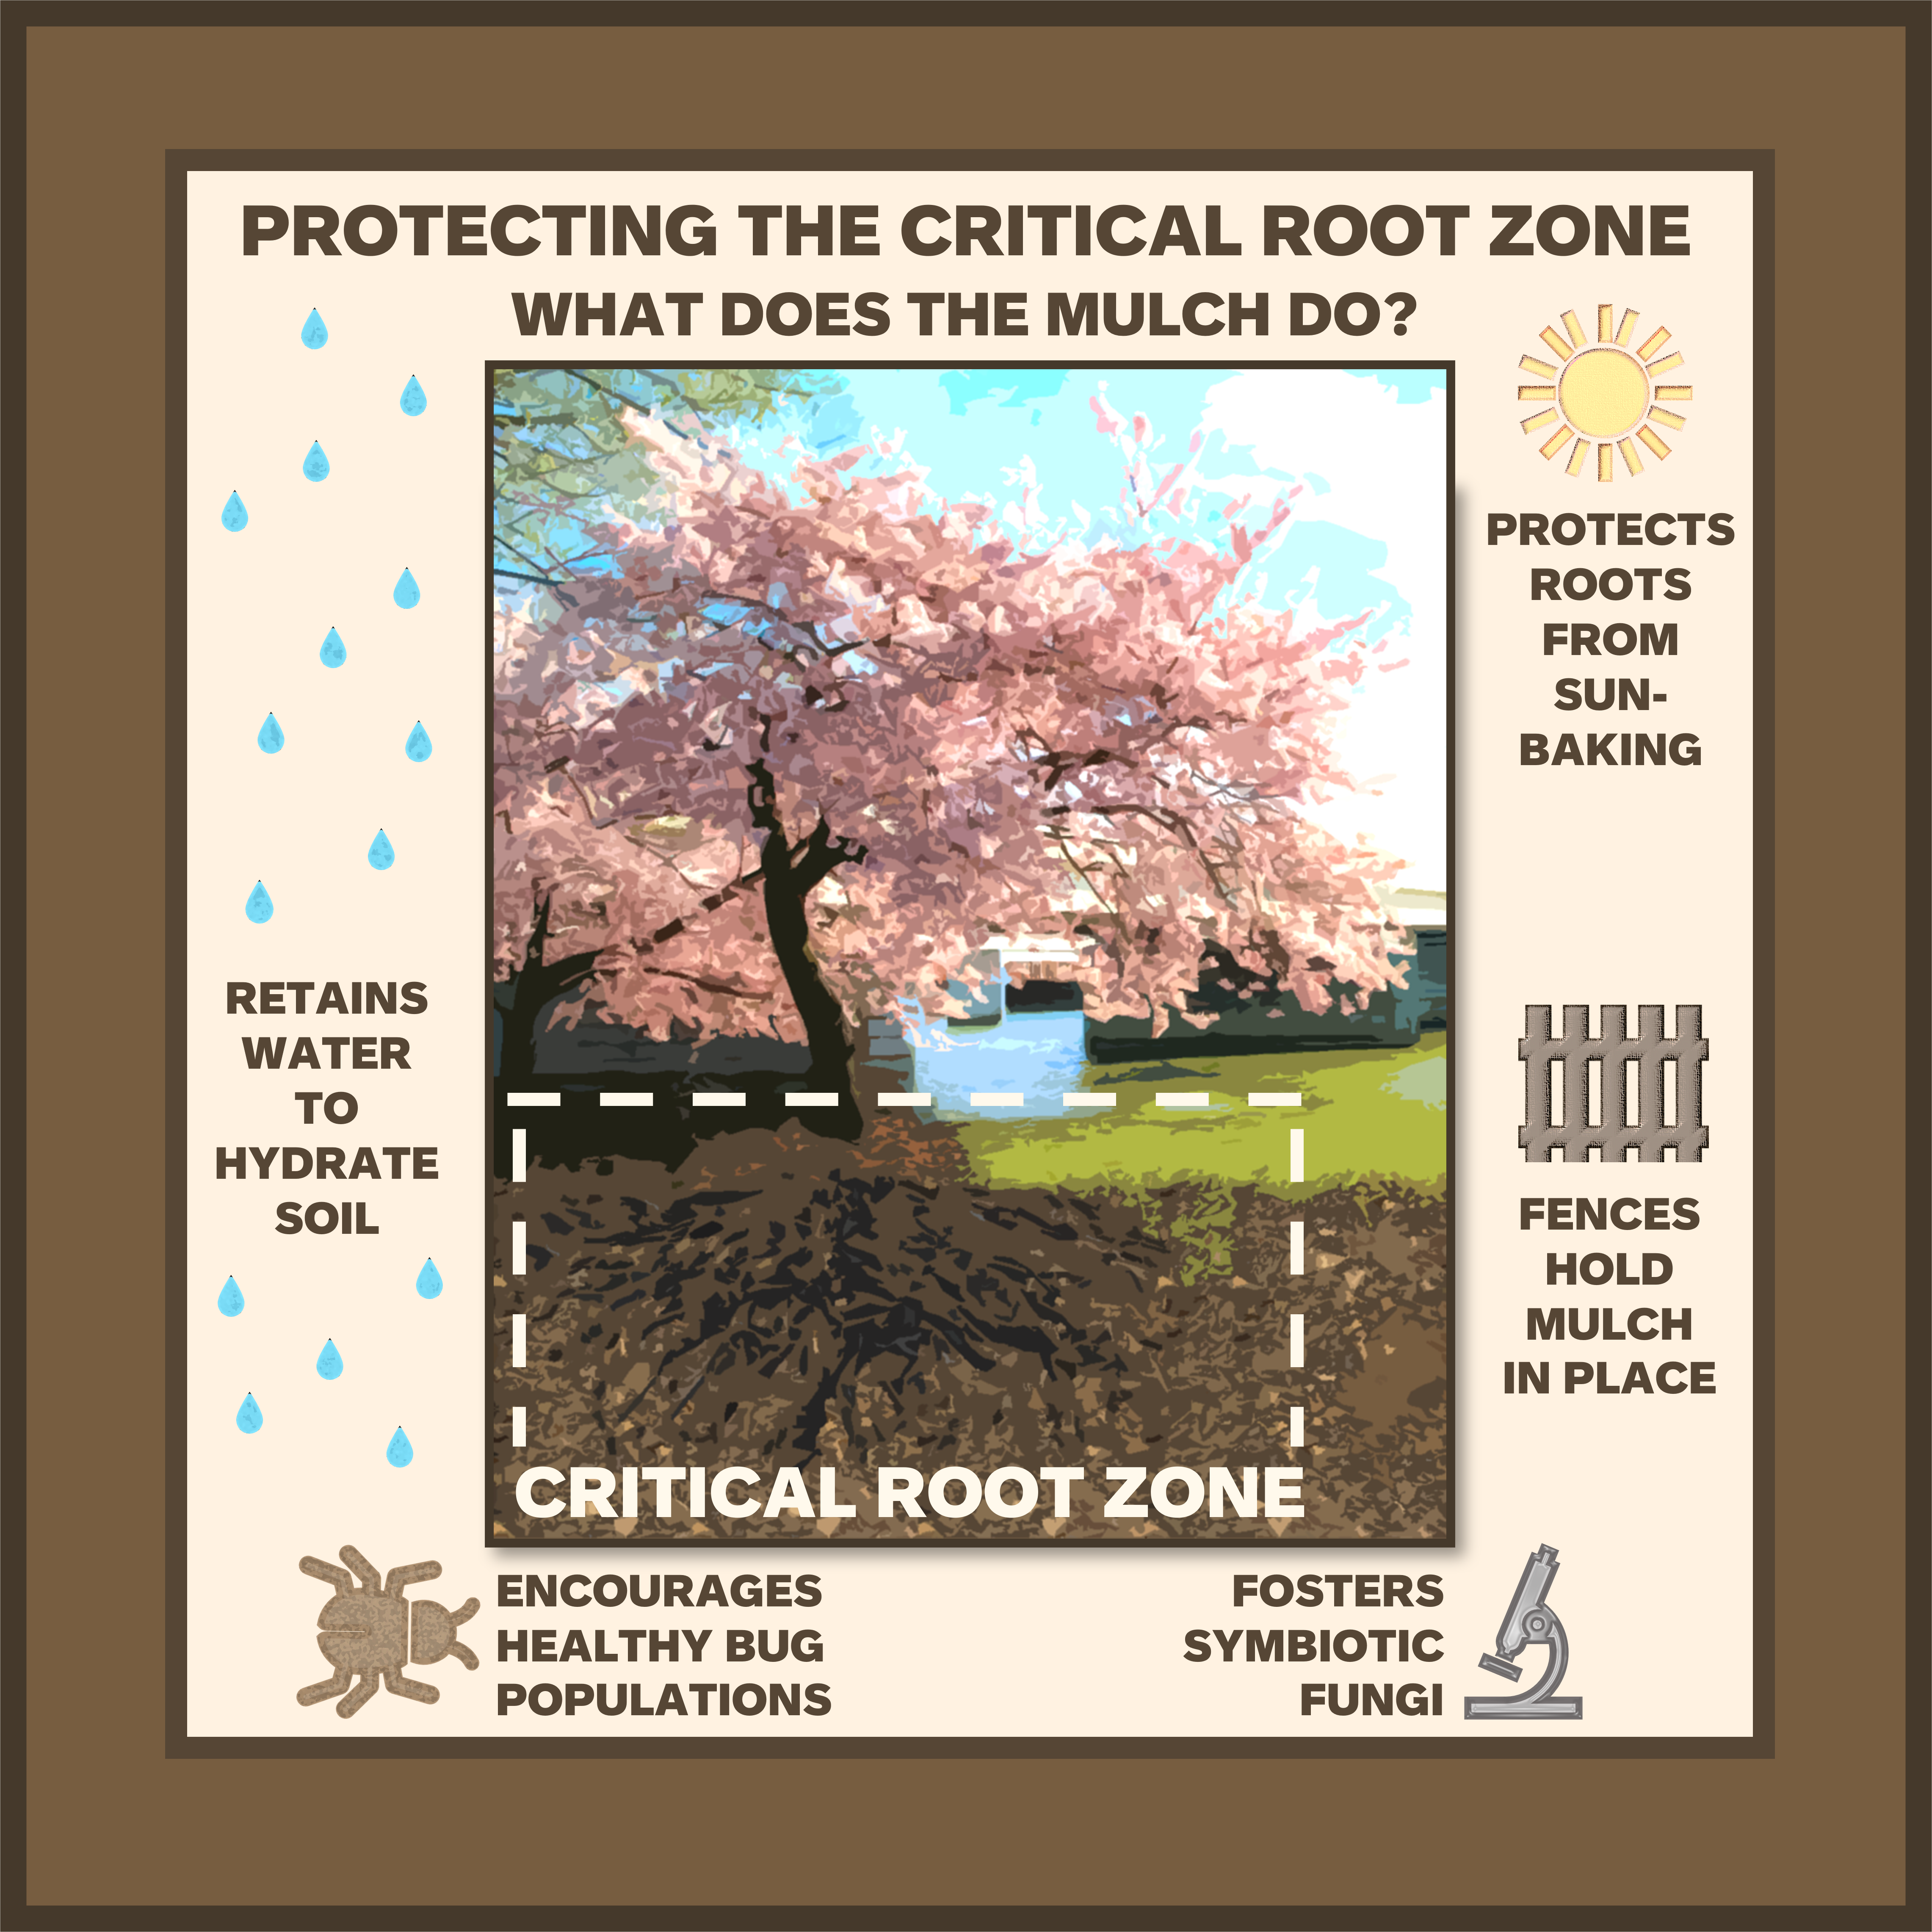 Infographic drawing the critical root zone of a tree, roughly an equal circumference to the tree canopy